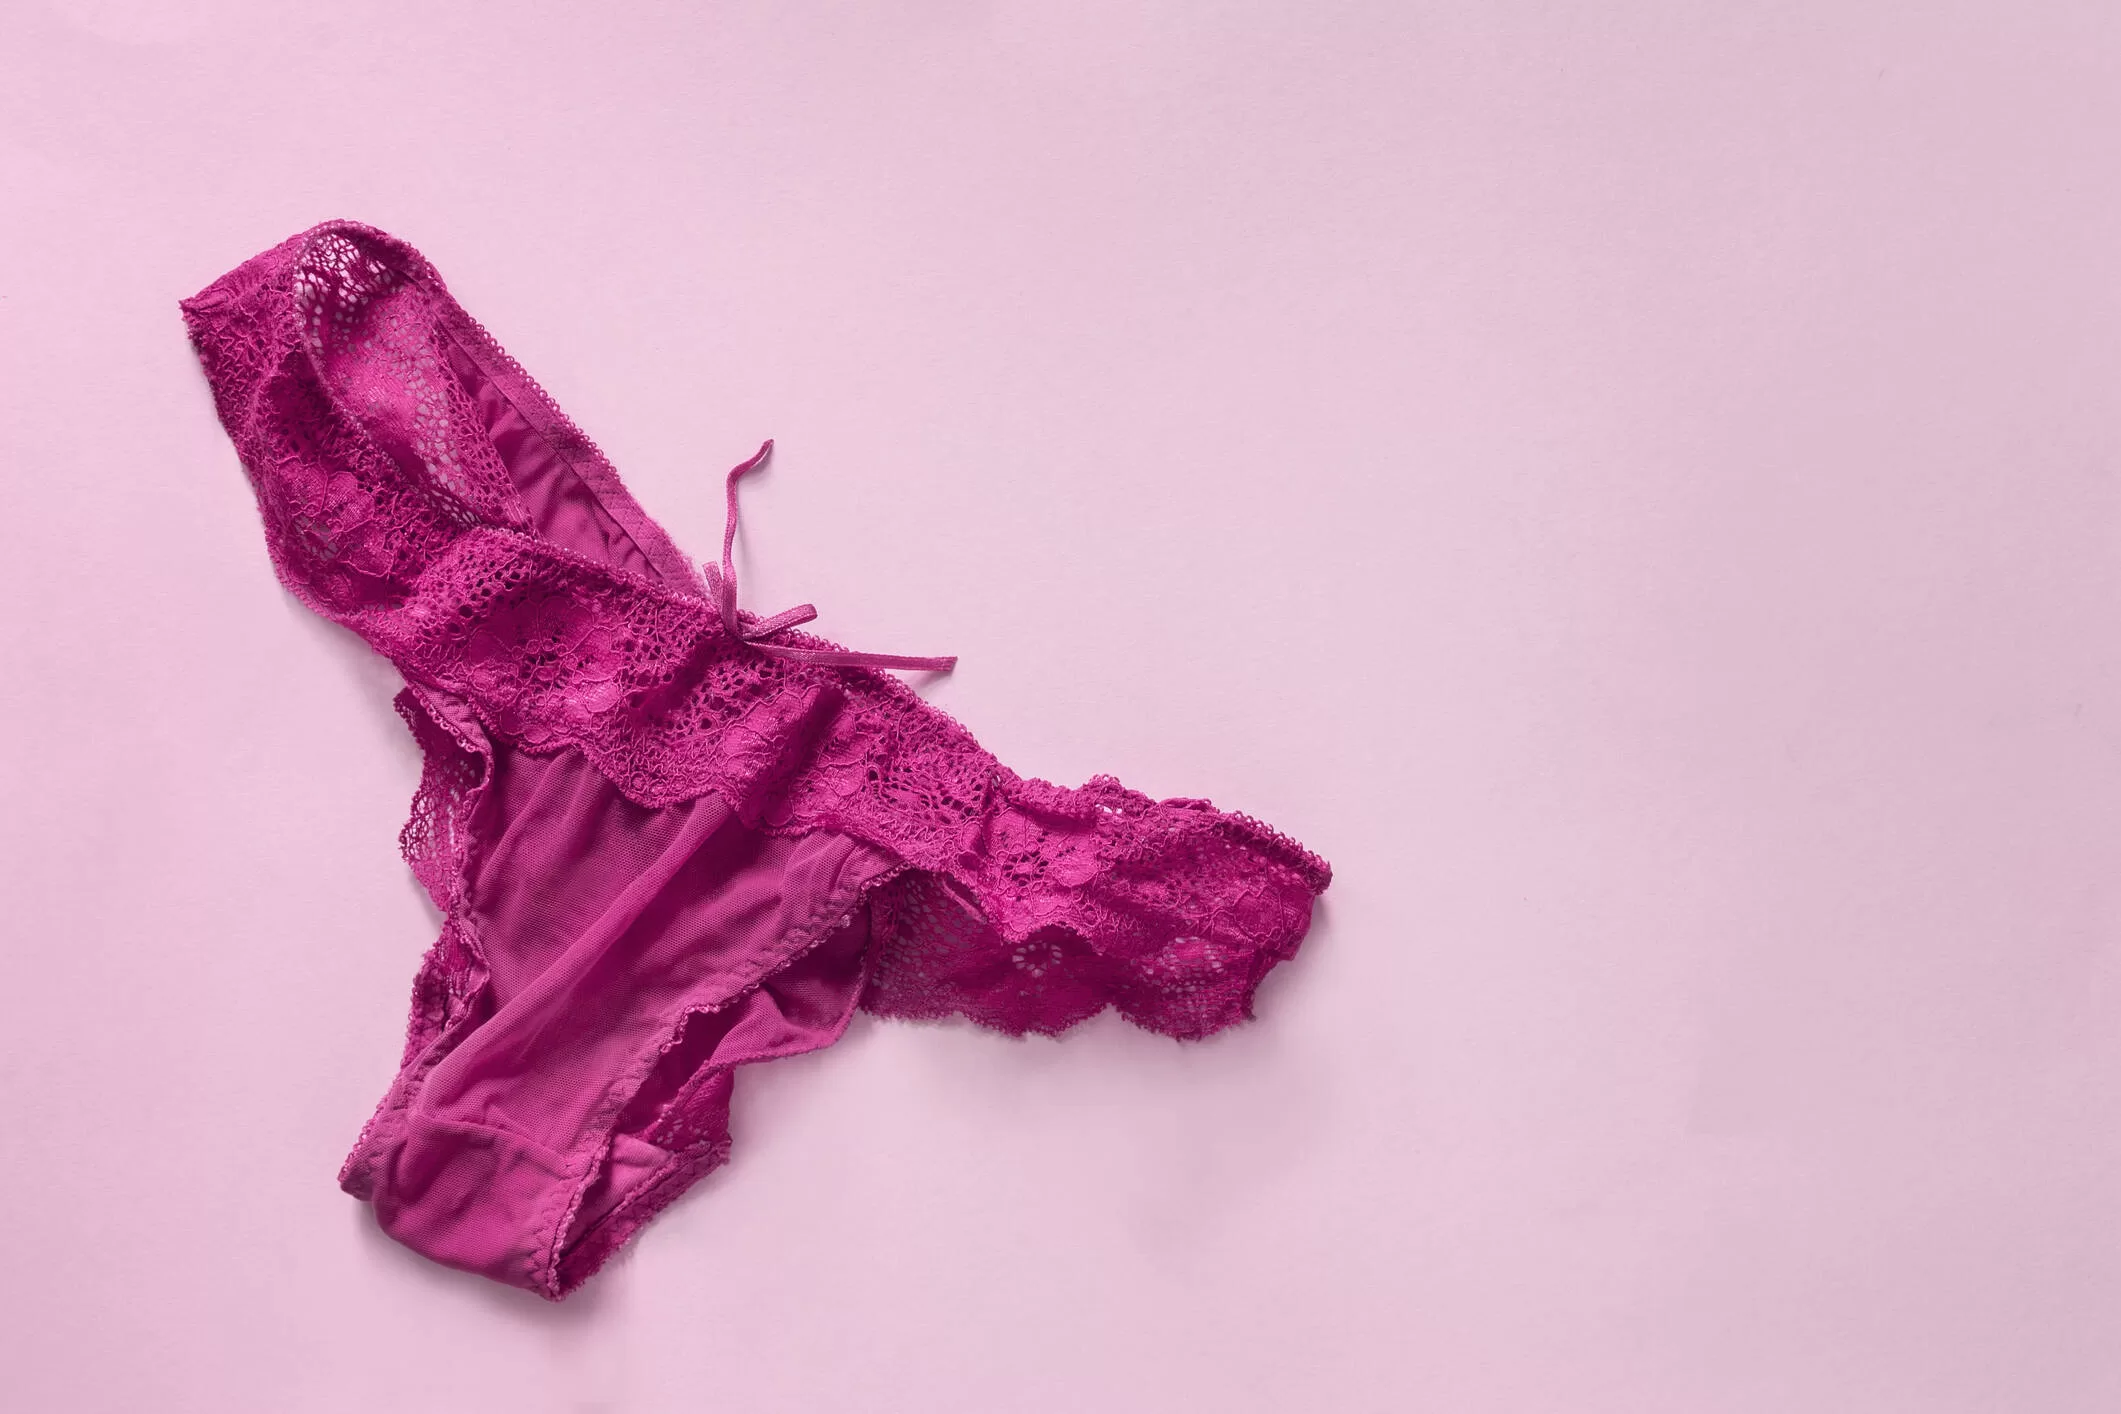 This is the curious reason why women's underwear has a 'pocket'
